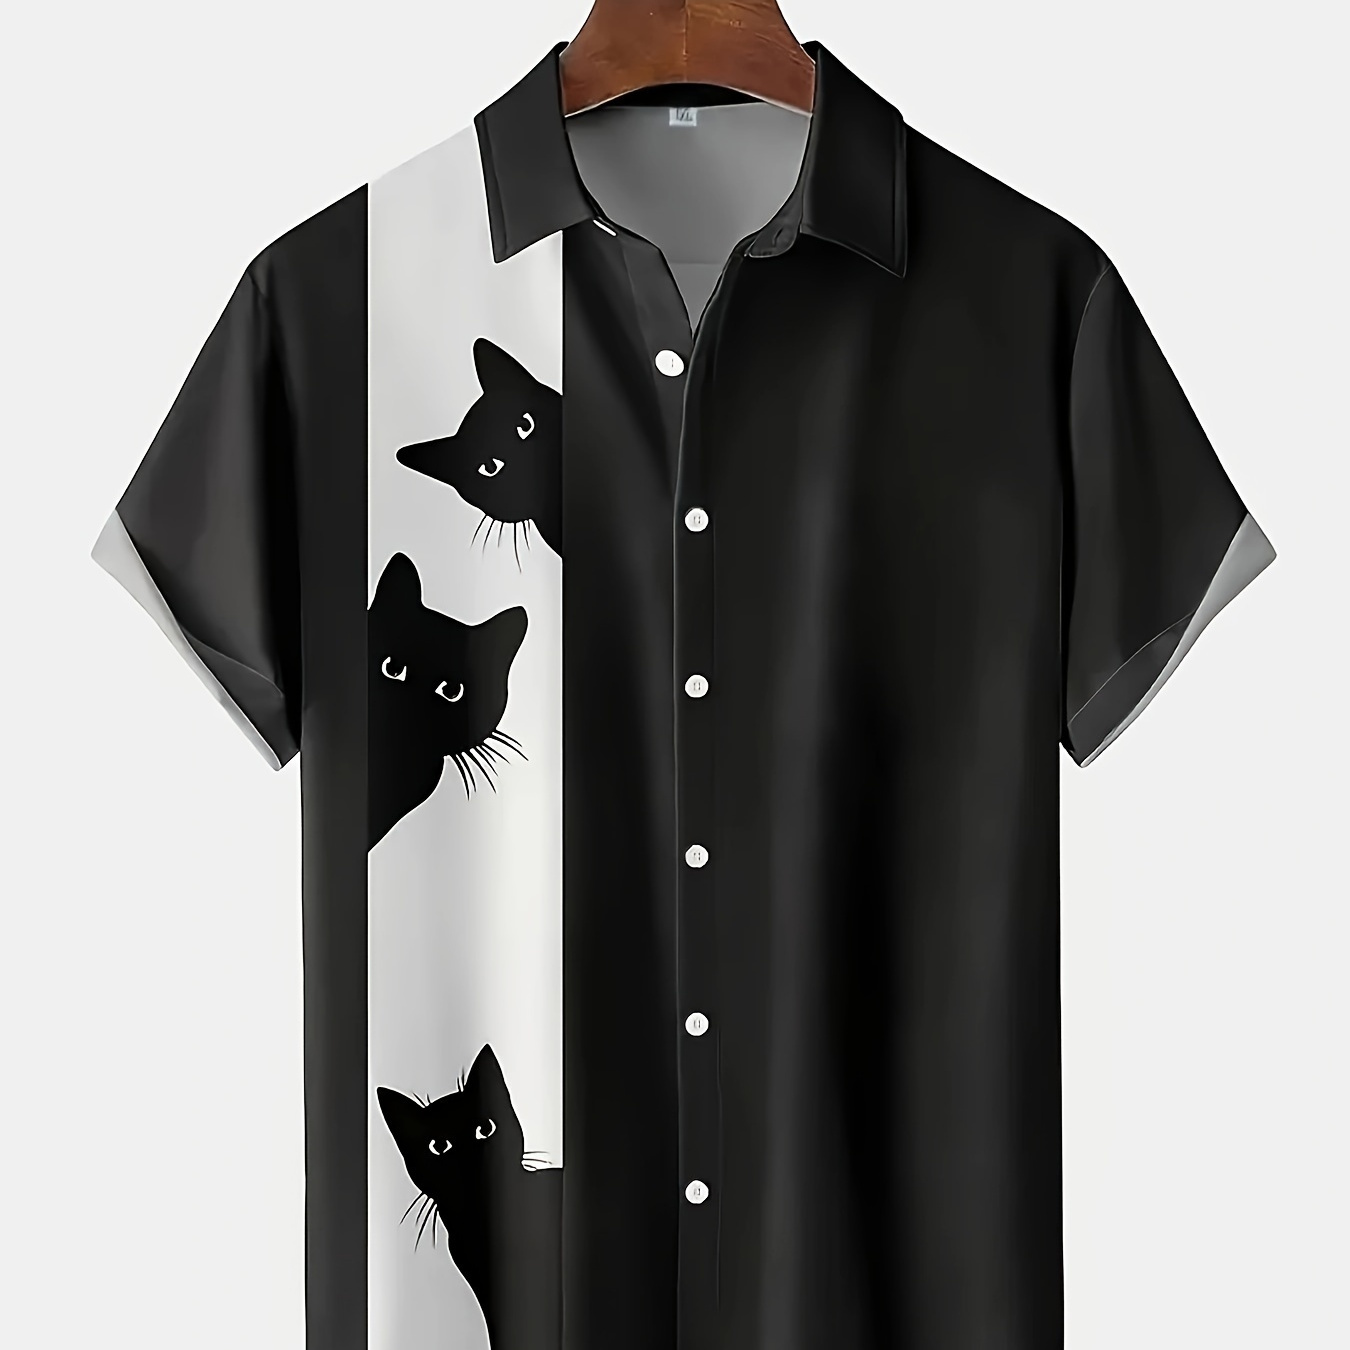 

Men's Casual Lapel Collar Graphic Shirt With Stylish Cat Print For Summer Beach, Pool And Vacation